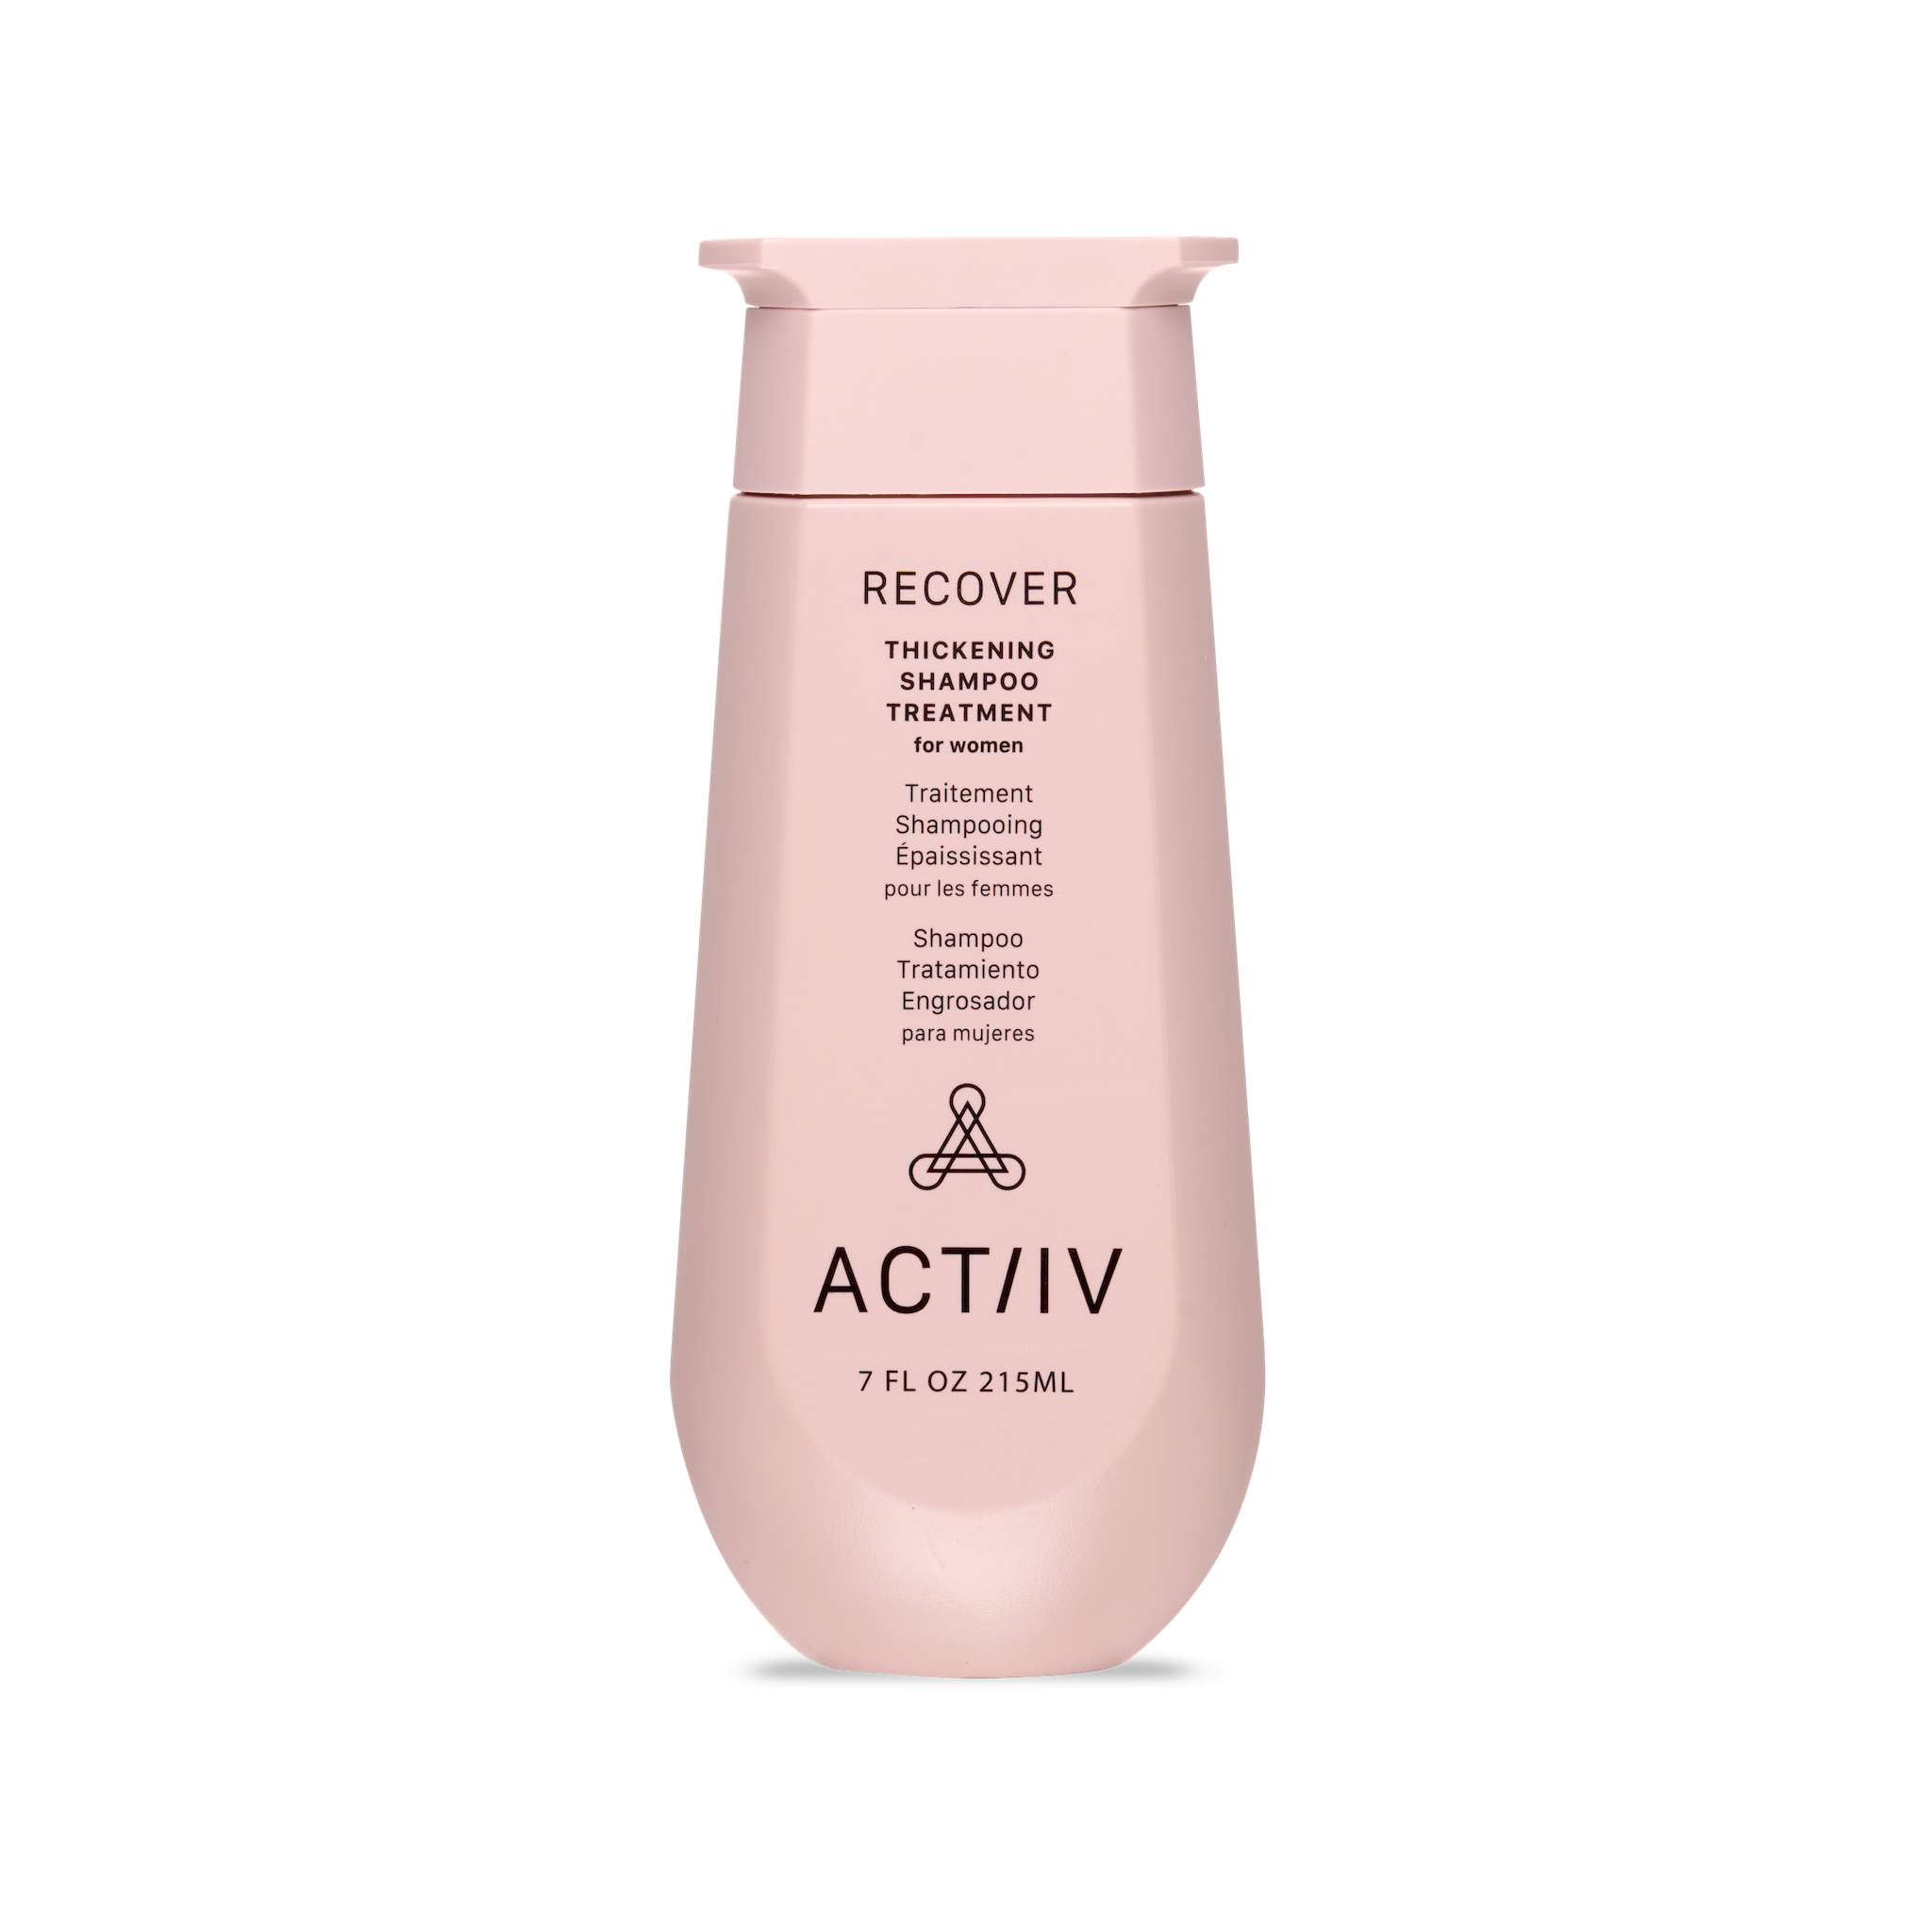 Actiiv Recover Thickening Shampoo Treatment for Women 7oz Bottle